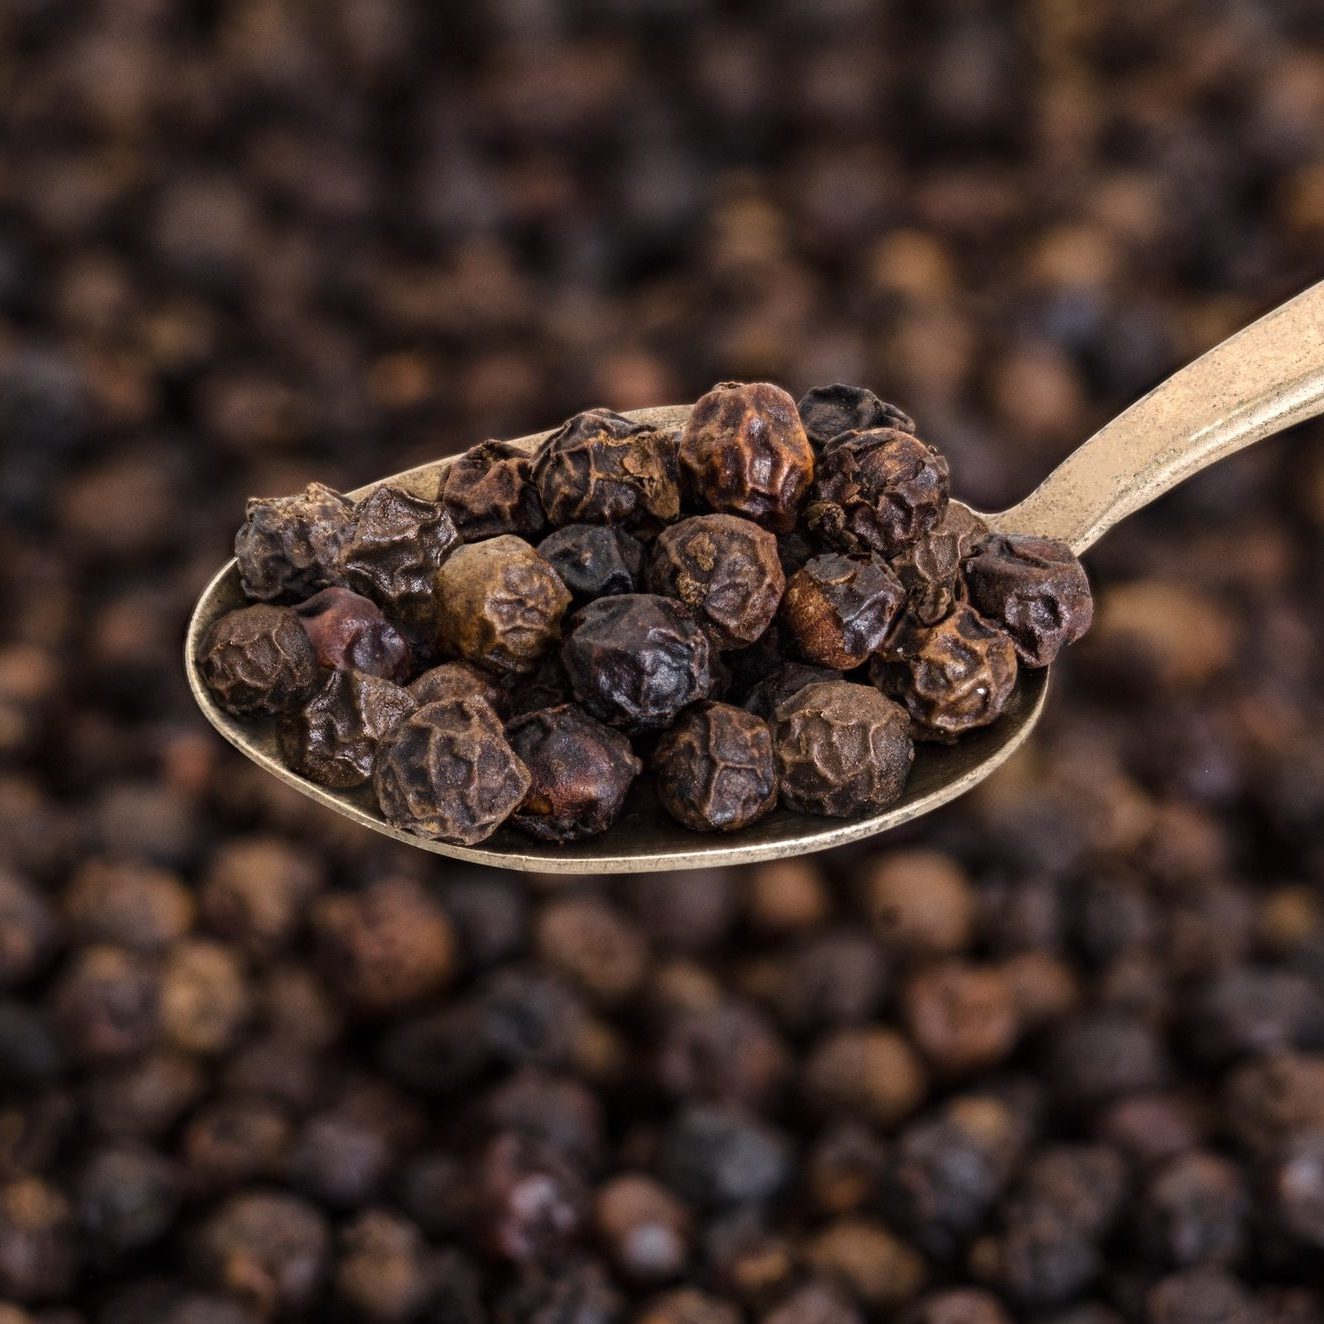 Whole Black Pepper on Old Spoon